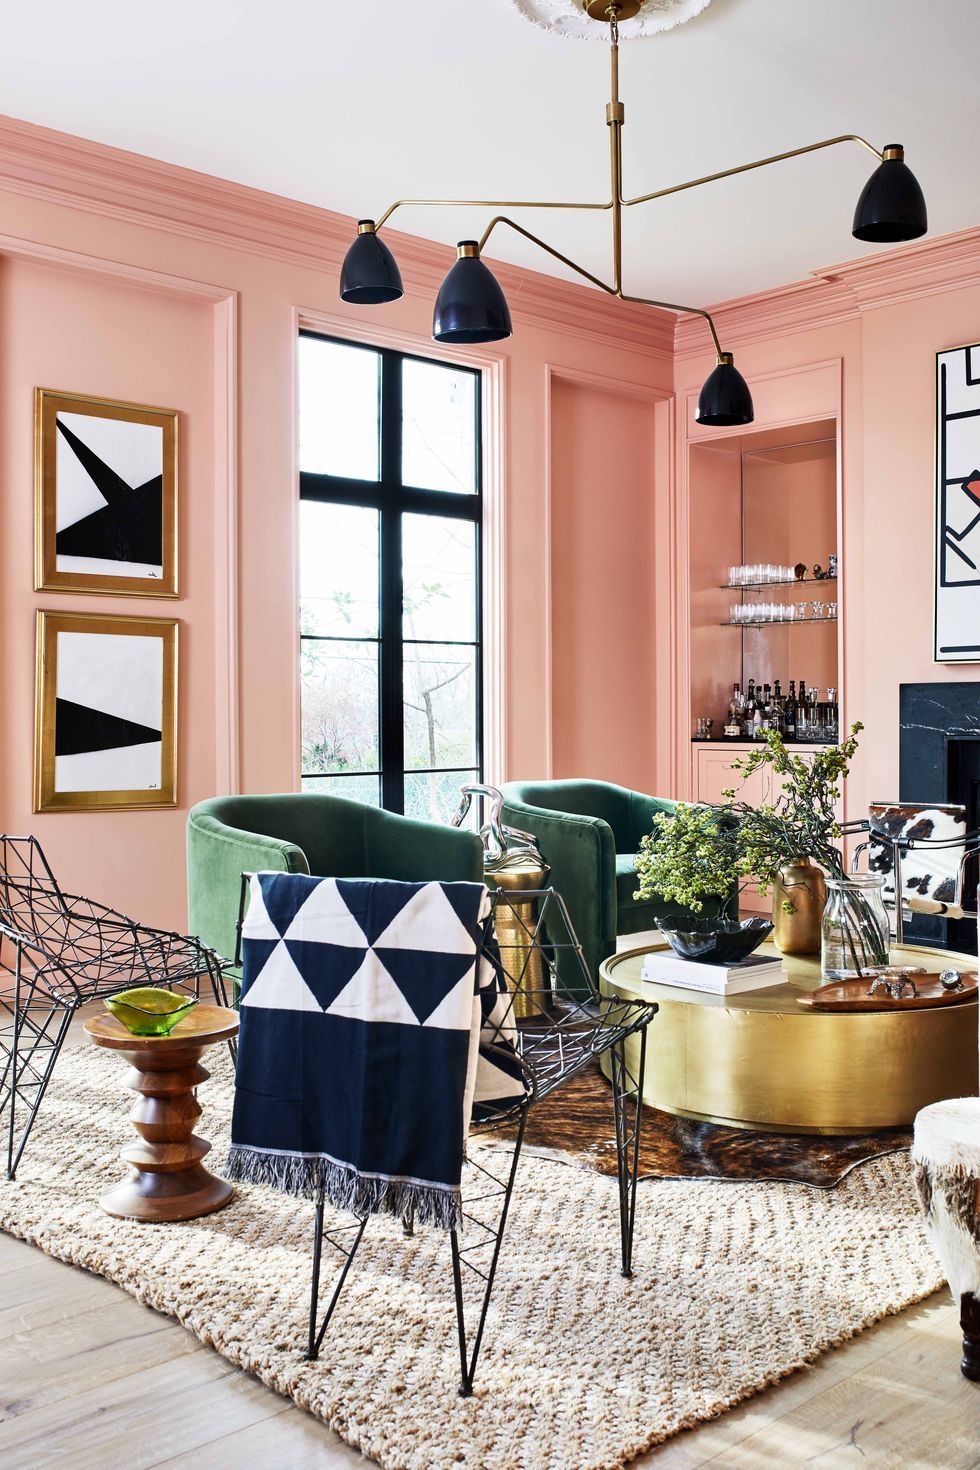 Use the peach color to decorate amazing interiors